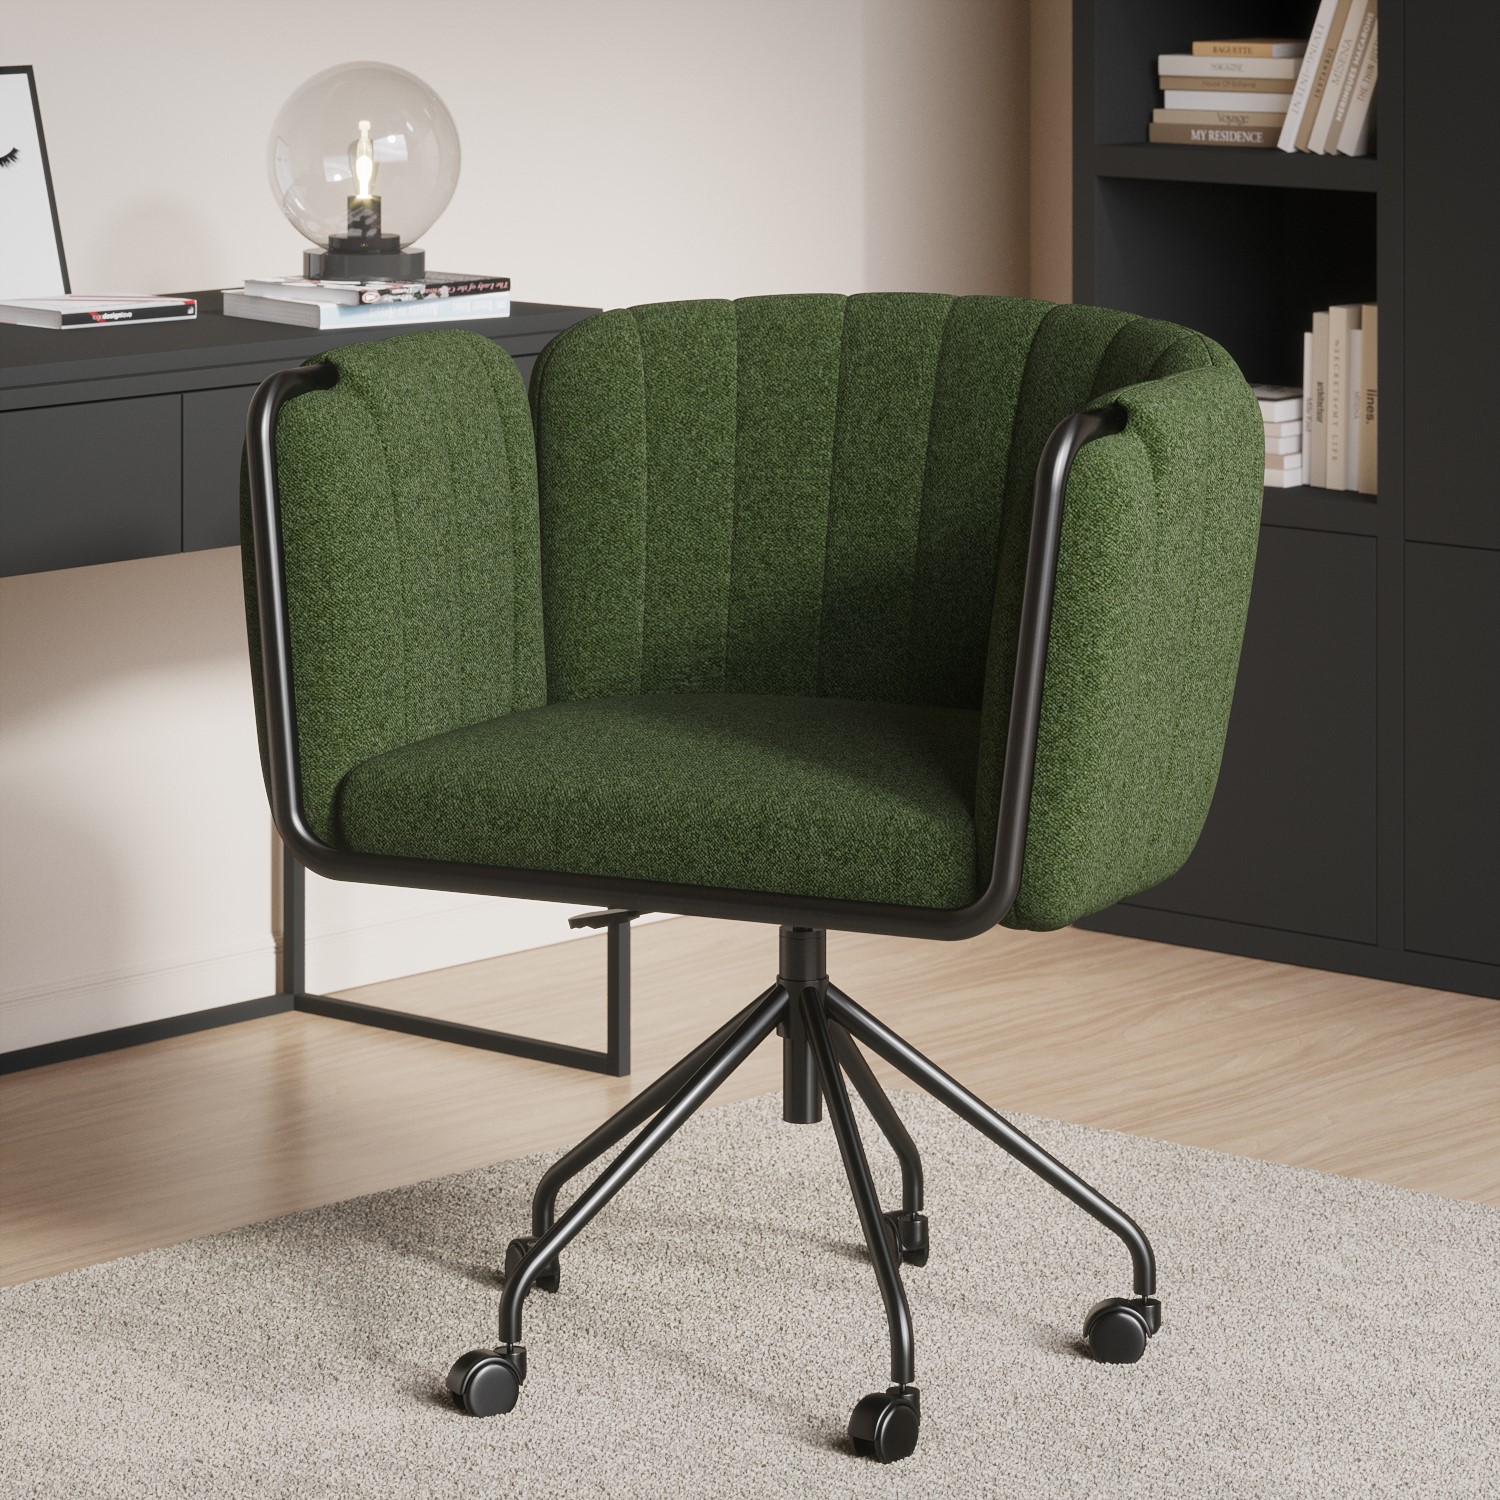 Photo of Olive green fabric swivel office chair - orlaa